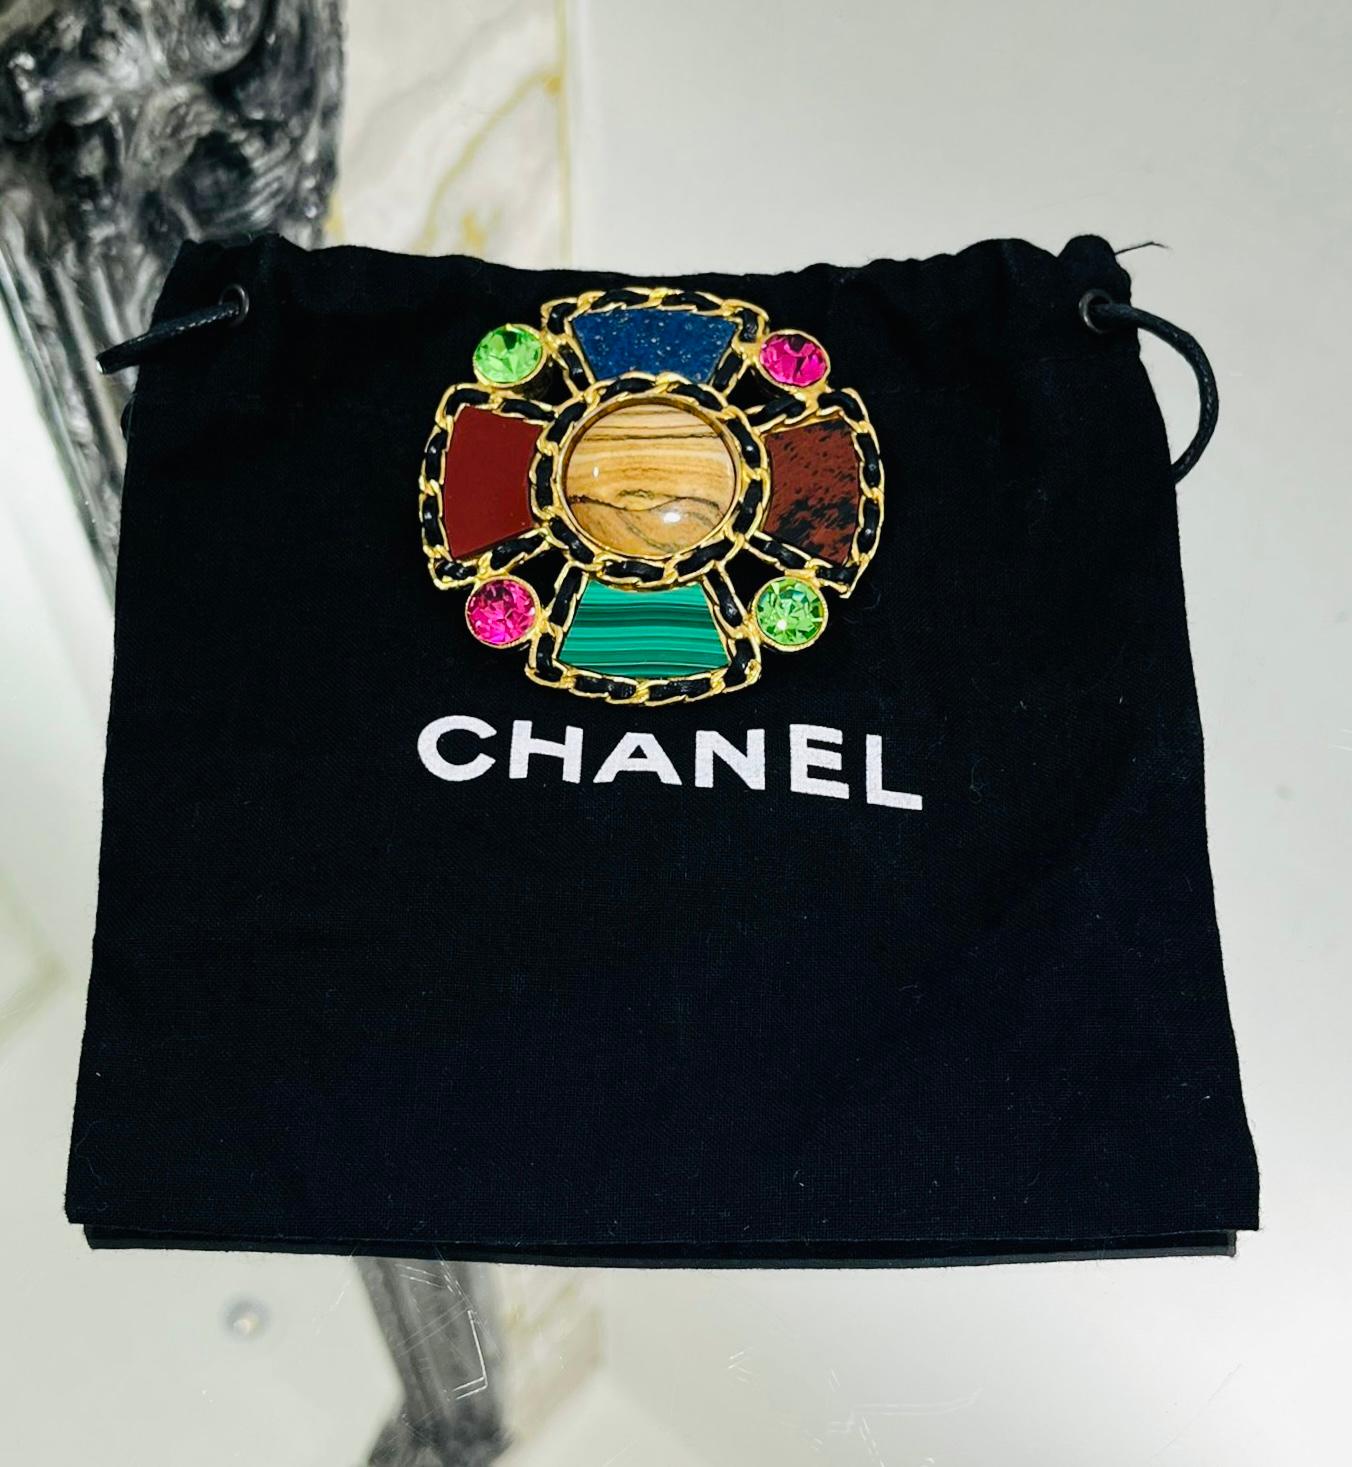 Very Rare - Chanel Vintage Gripoix Multi-Gemstone & Crystal Flower Brooch

Very rare is this gold Chanel brooch designed with signature leather and chain trim, five semi-precious stones with two green and two pink crystals between them.

The edges